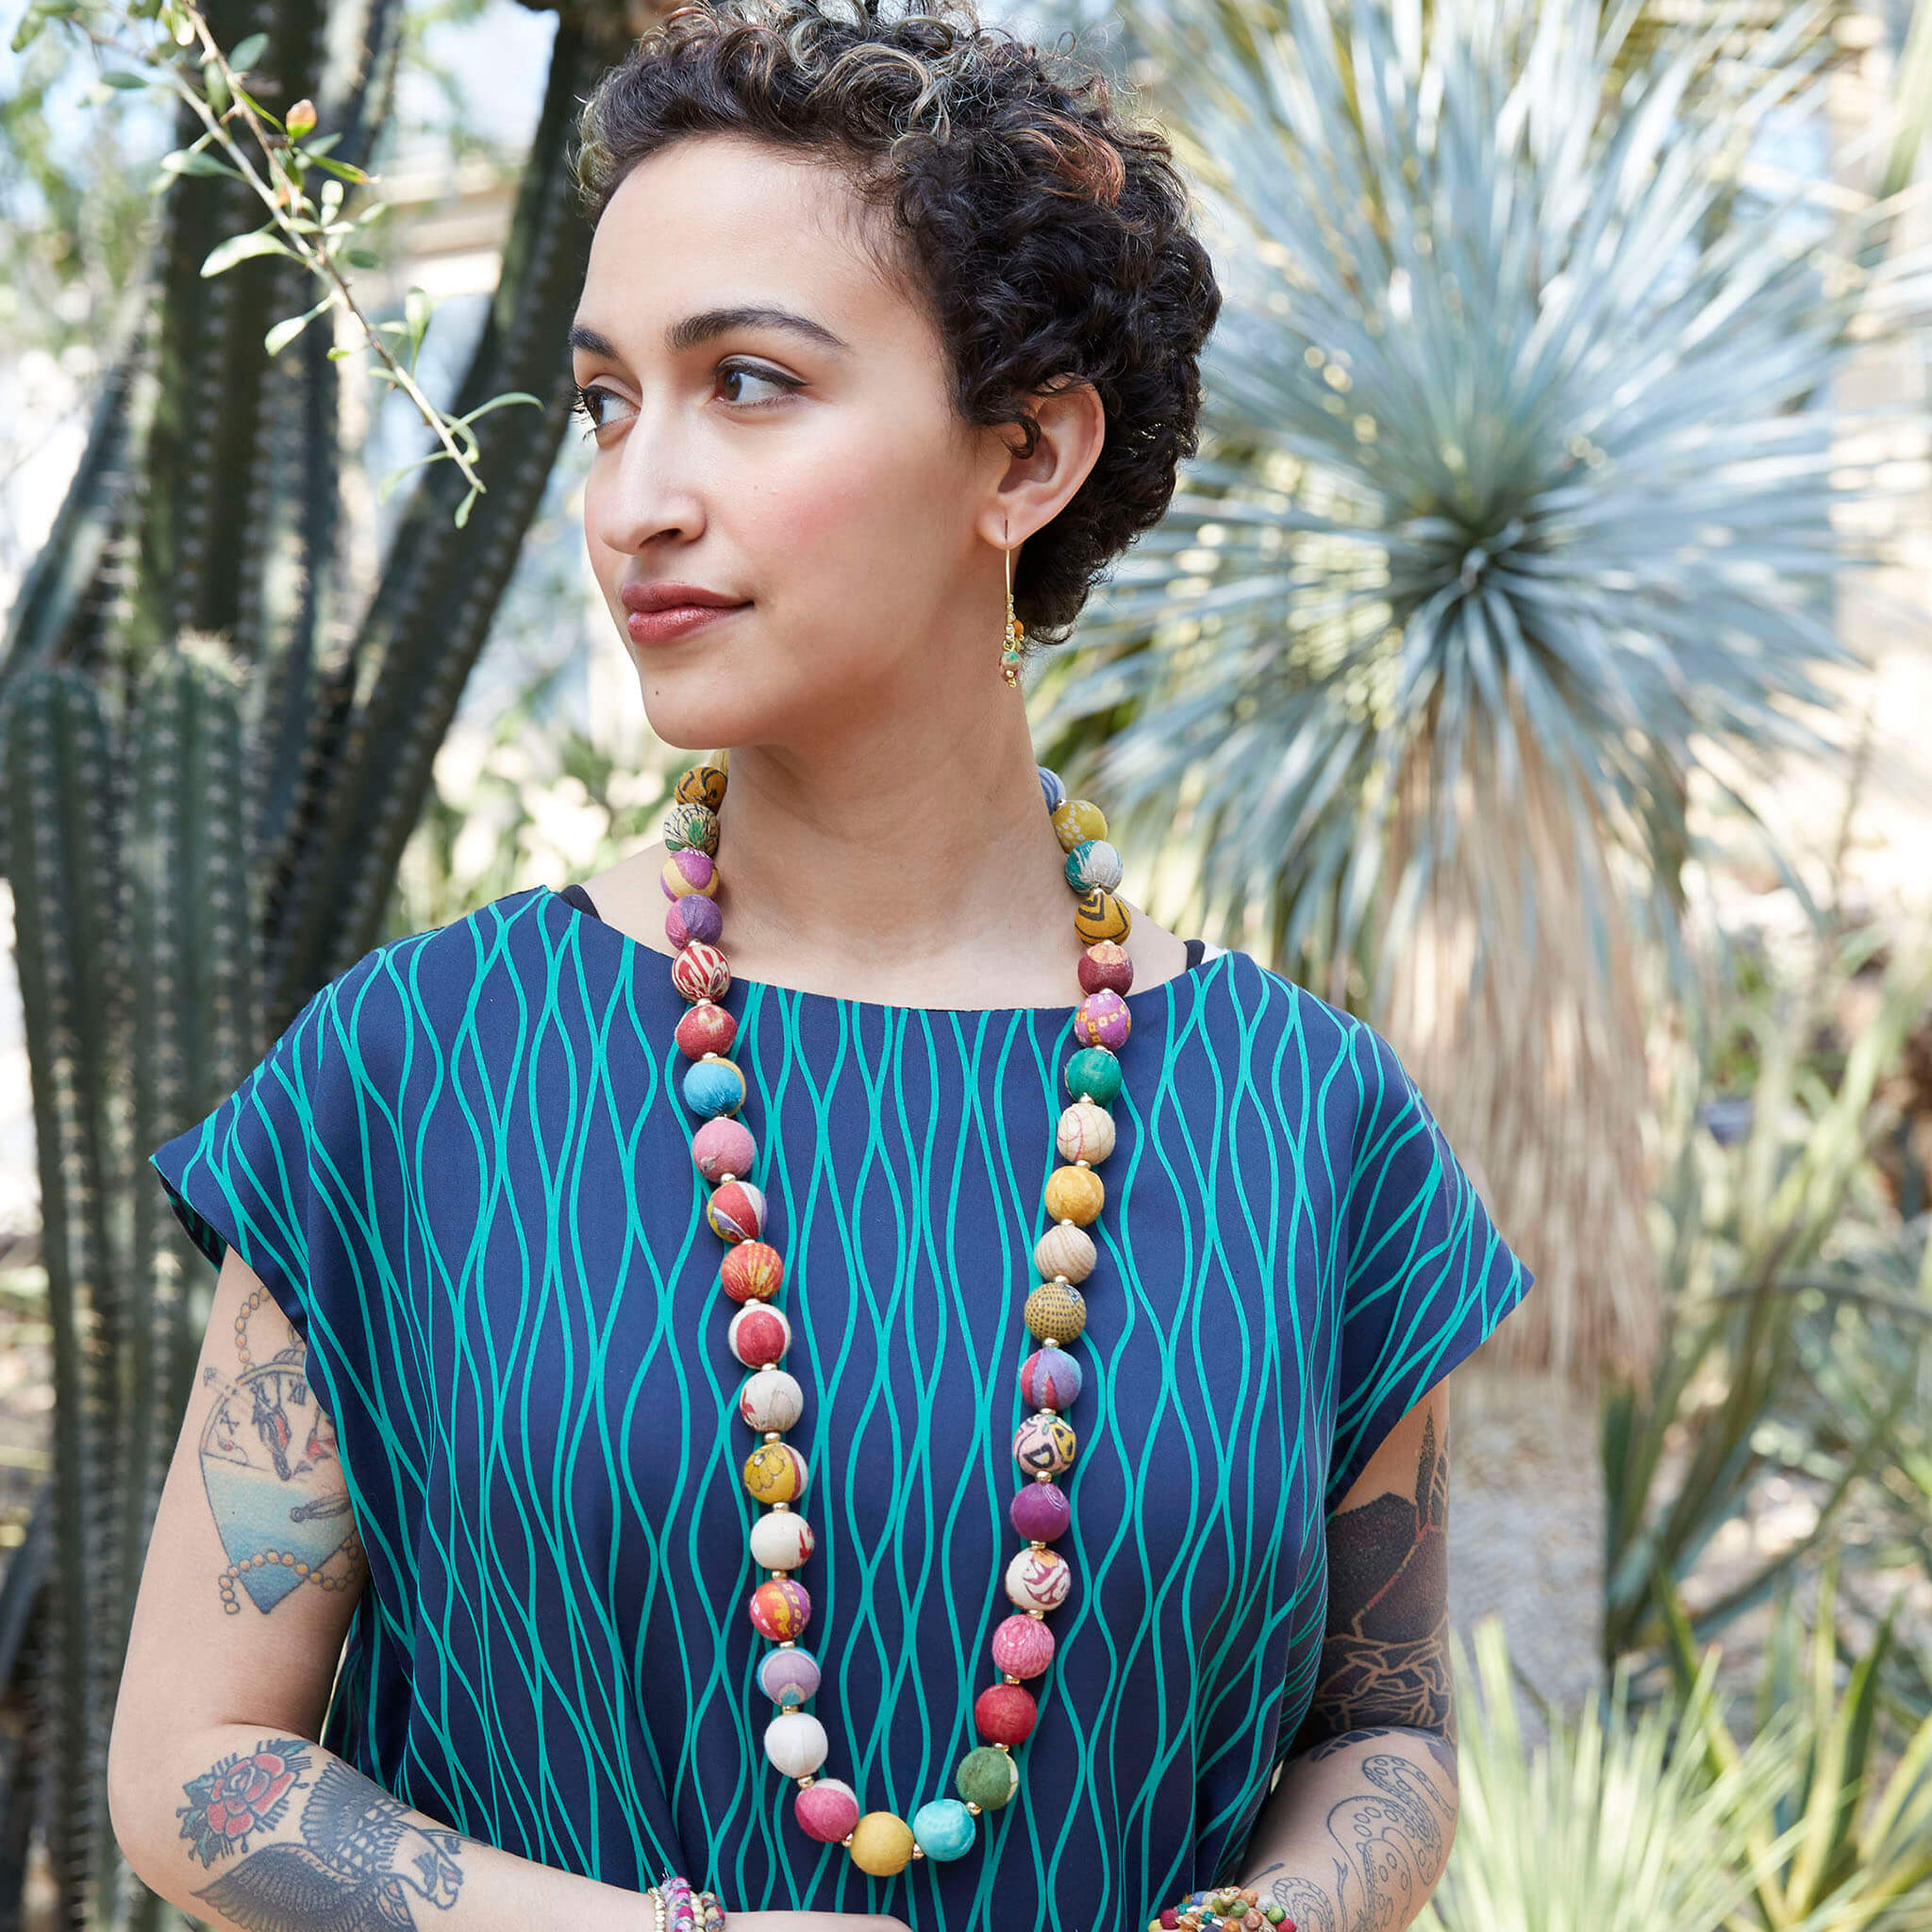 A woman with a patterned blue shirt wears the Kantha Garland Necklace.